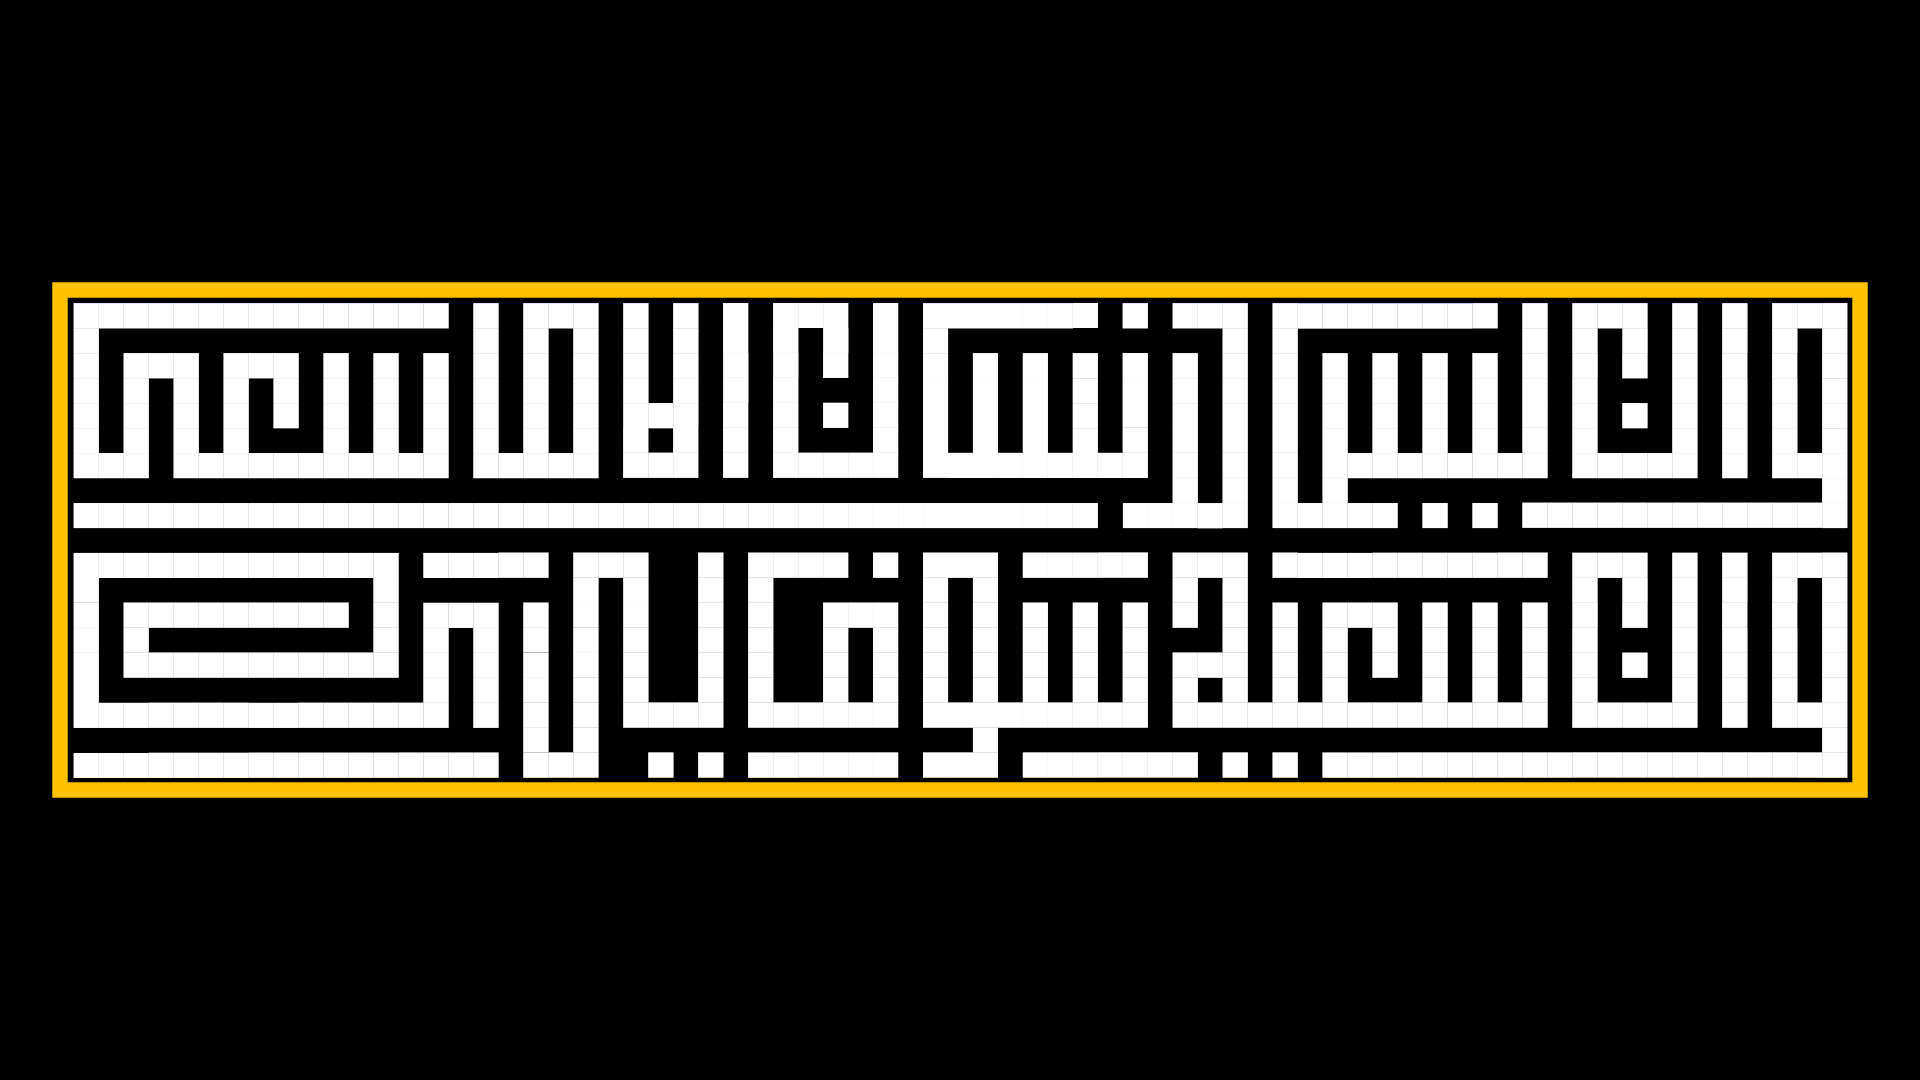 General 1920x1080 Islam Quran Arabic religion simple background black background calligraphy